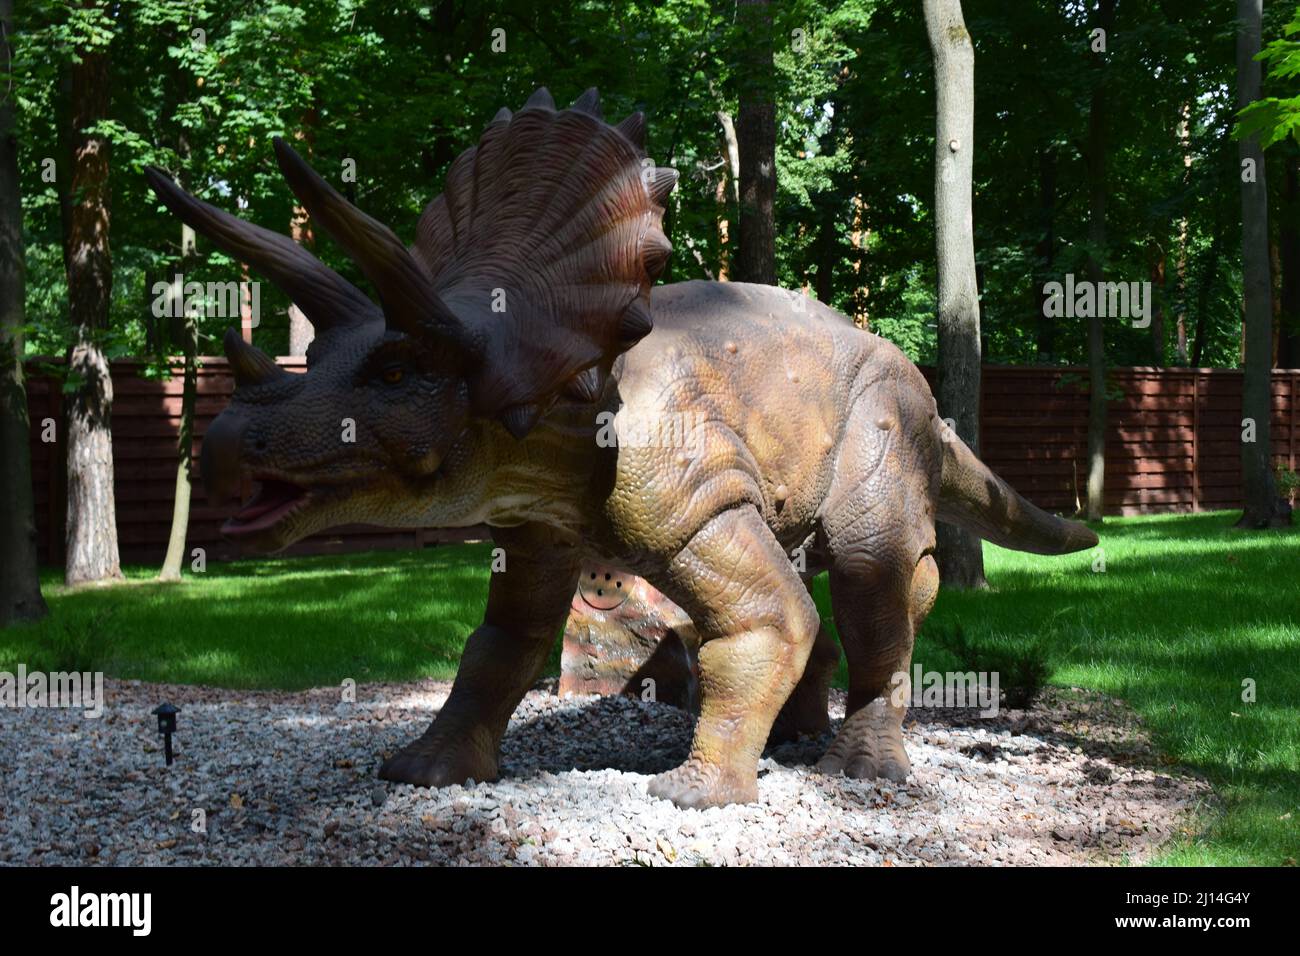 DINO PARK, KHARKOV - AUGUST 8, 2021: Dino Park Triceratops huge dinosaur of Jurassic era walks in the forest in summer on a sunny day. A wild lizard g Stock Photo